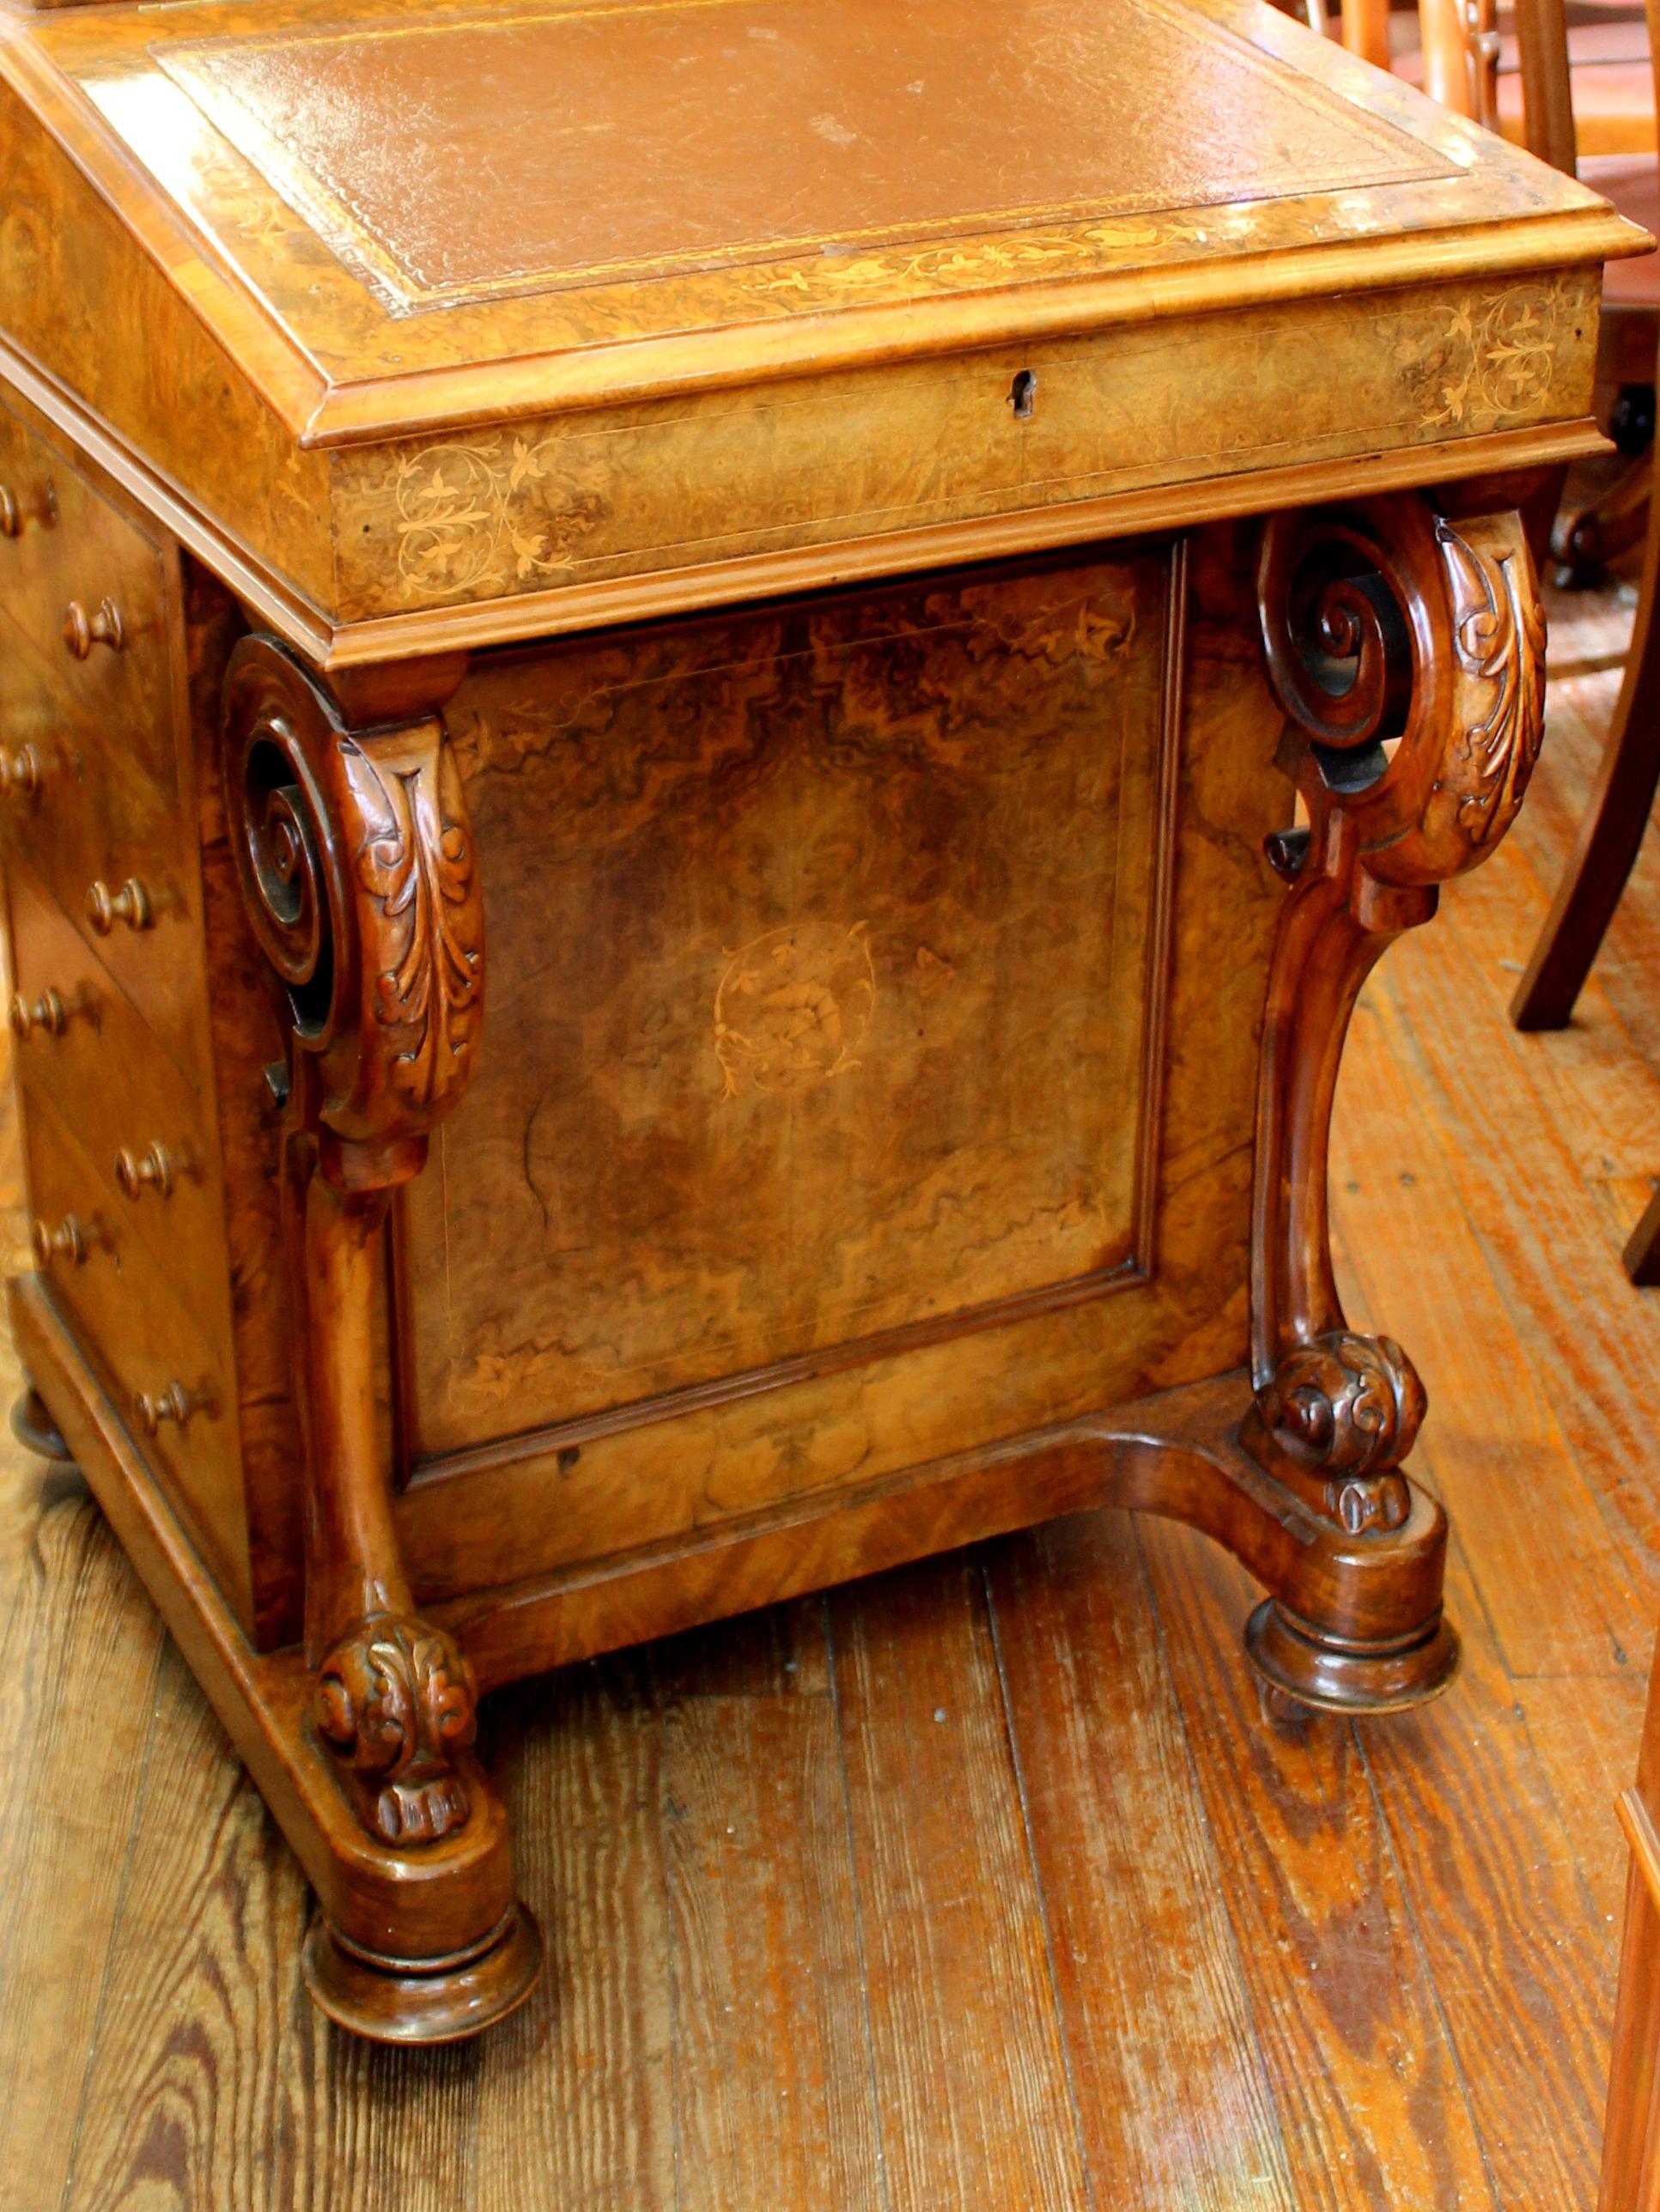 Rare and important antique Scottish exceptional burr walnut davenport or ship captain's desk with fabulous marquetry inlay and satin birch fitted interior; stationery lift-up compartment and retailer's (maker's) label. Handsome old leather.
Bank of